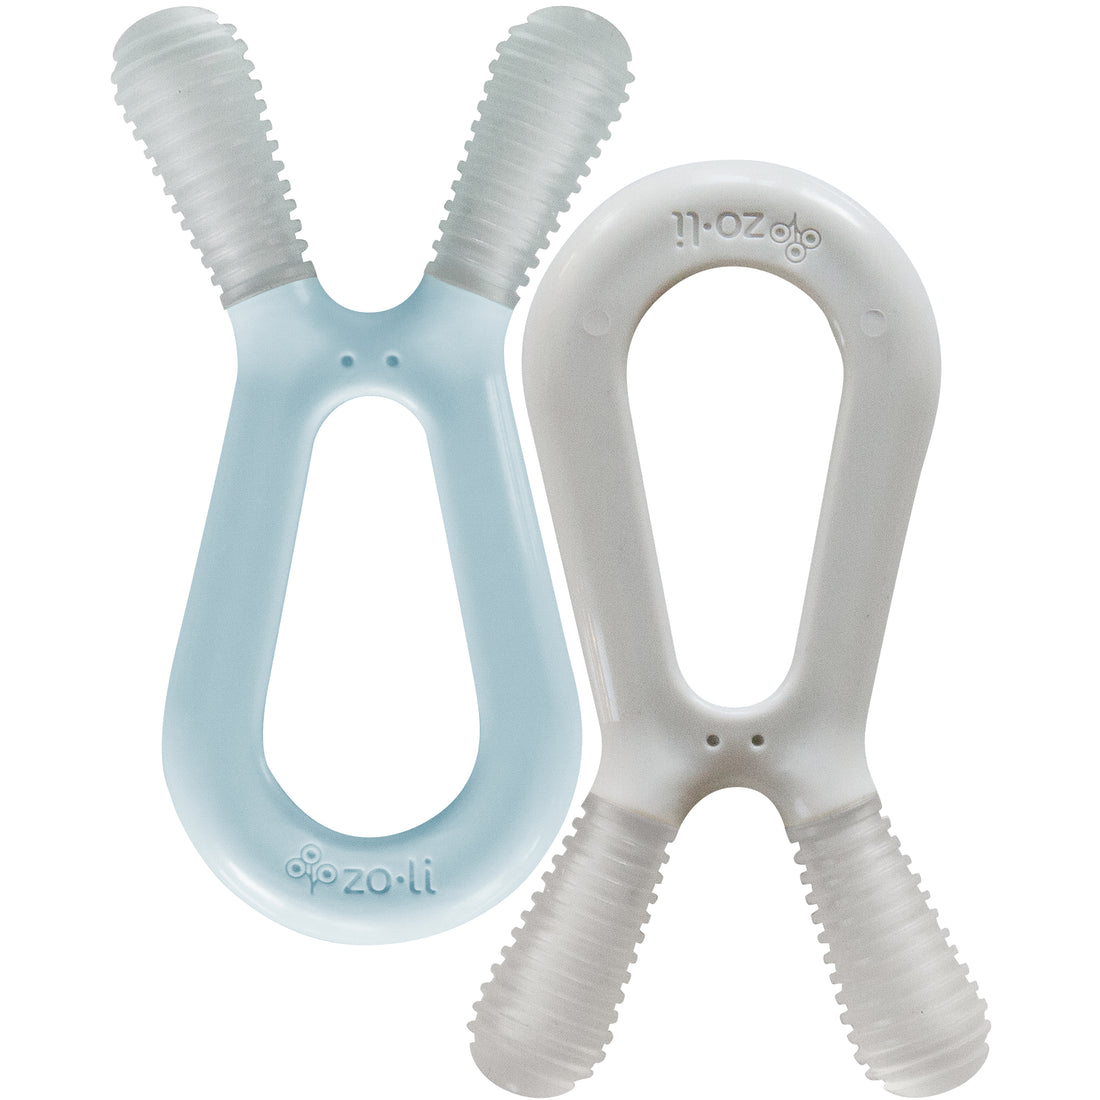 Bunny Teether 2 pack